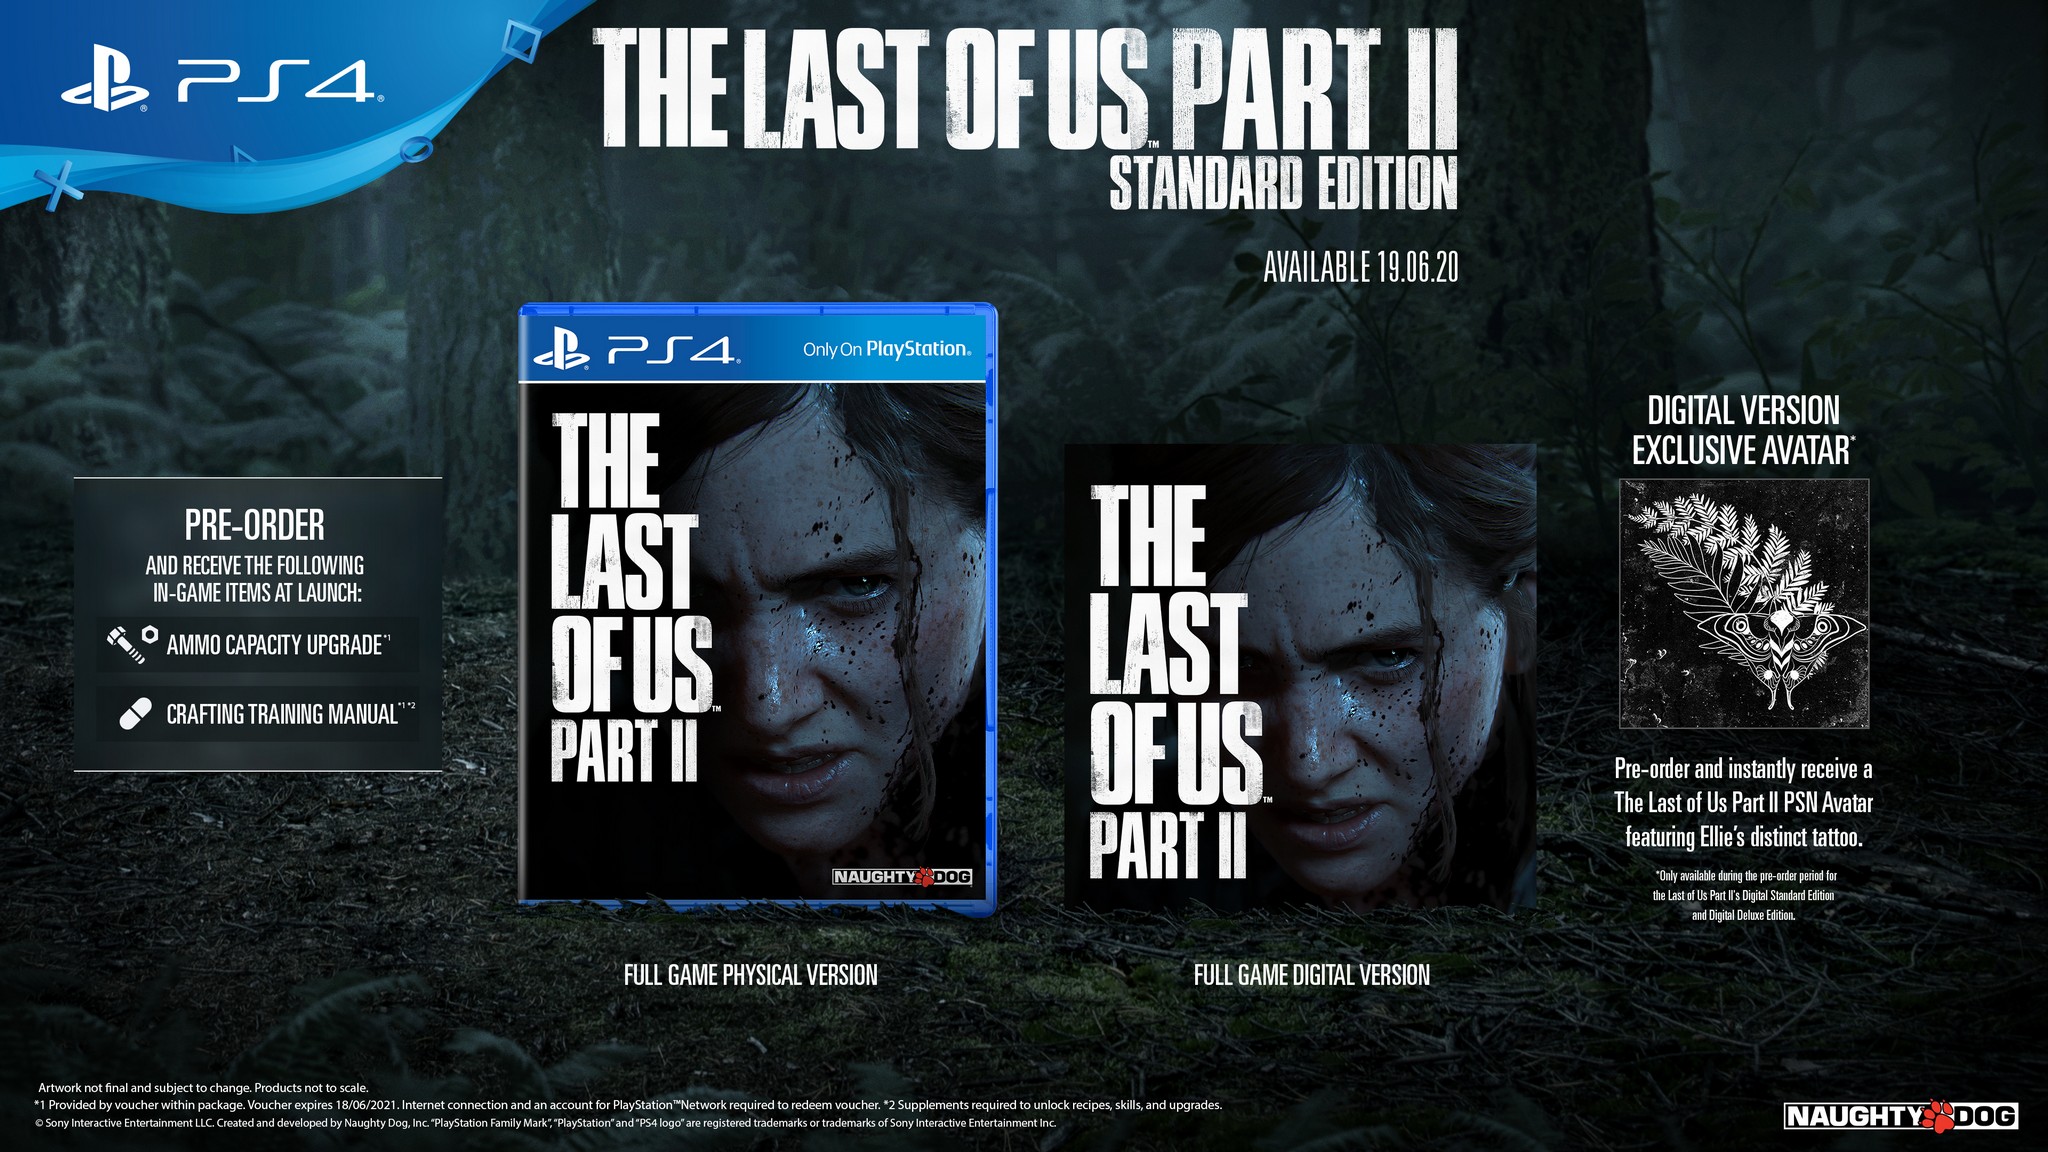 the last of us 2 ps4 price